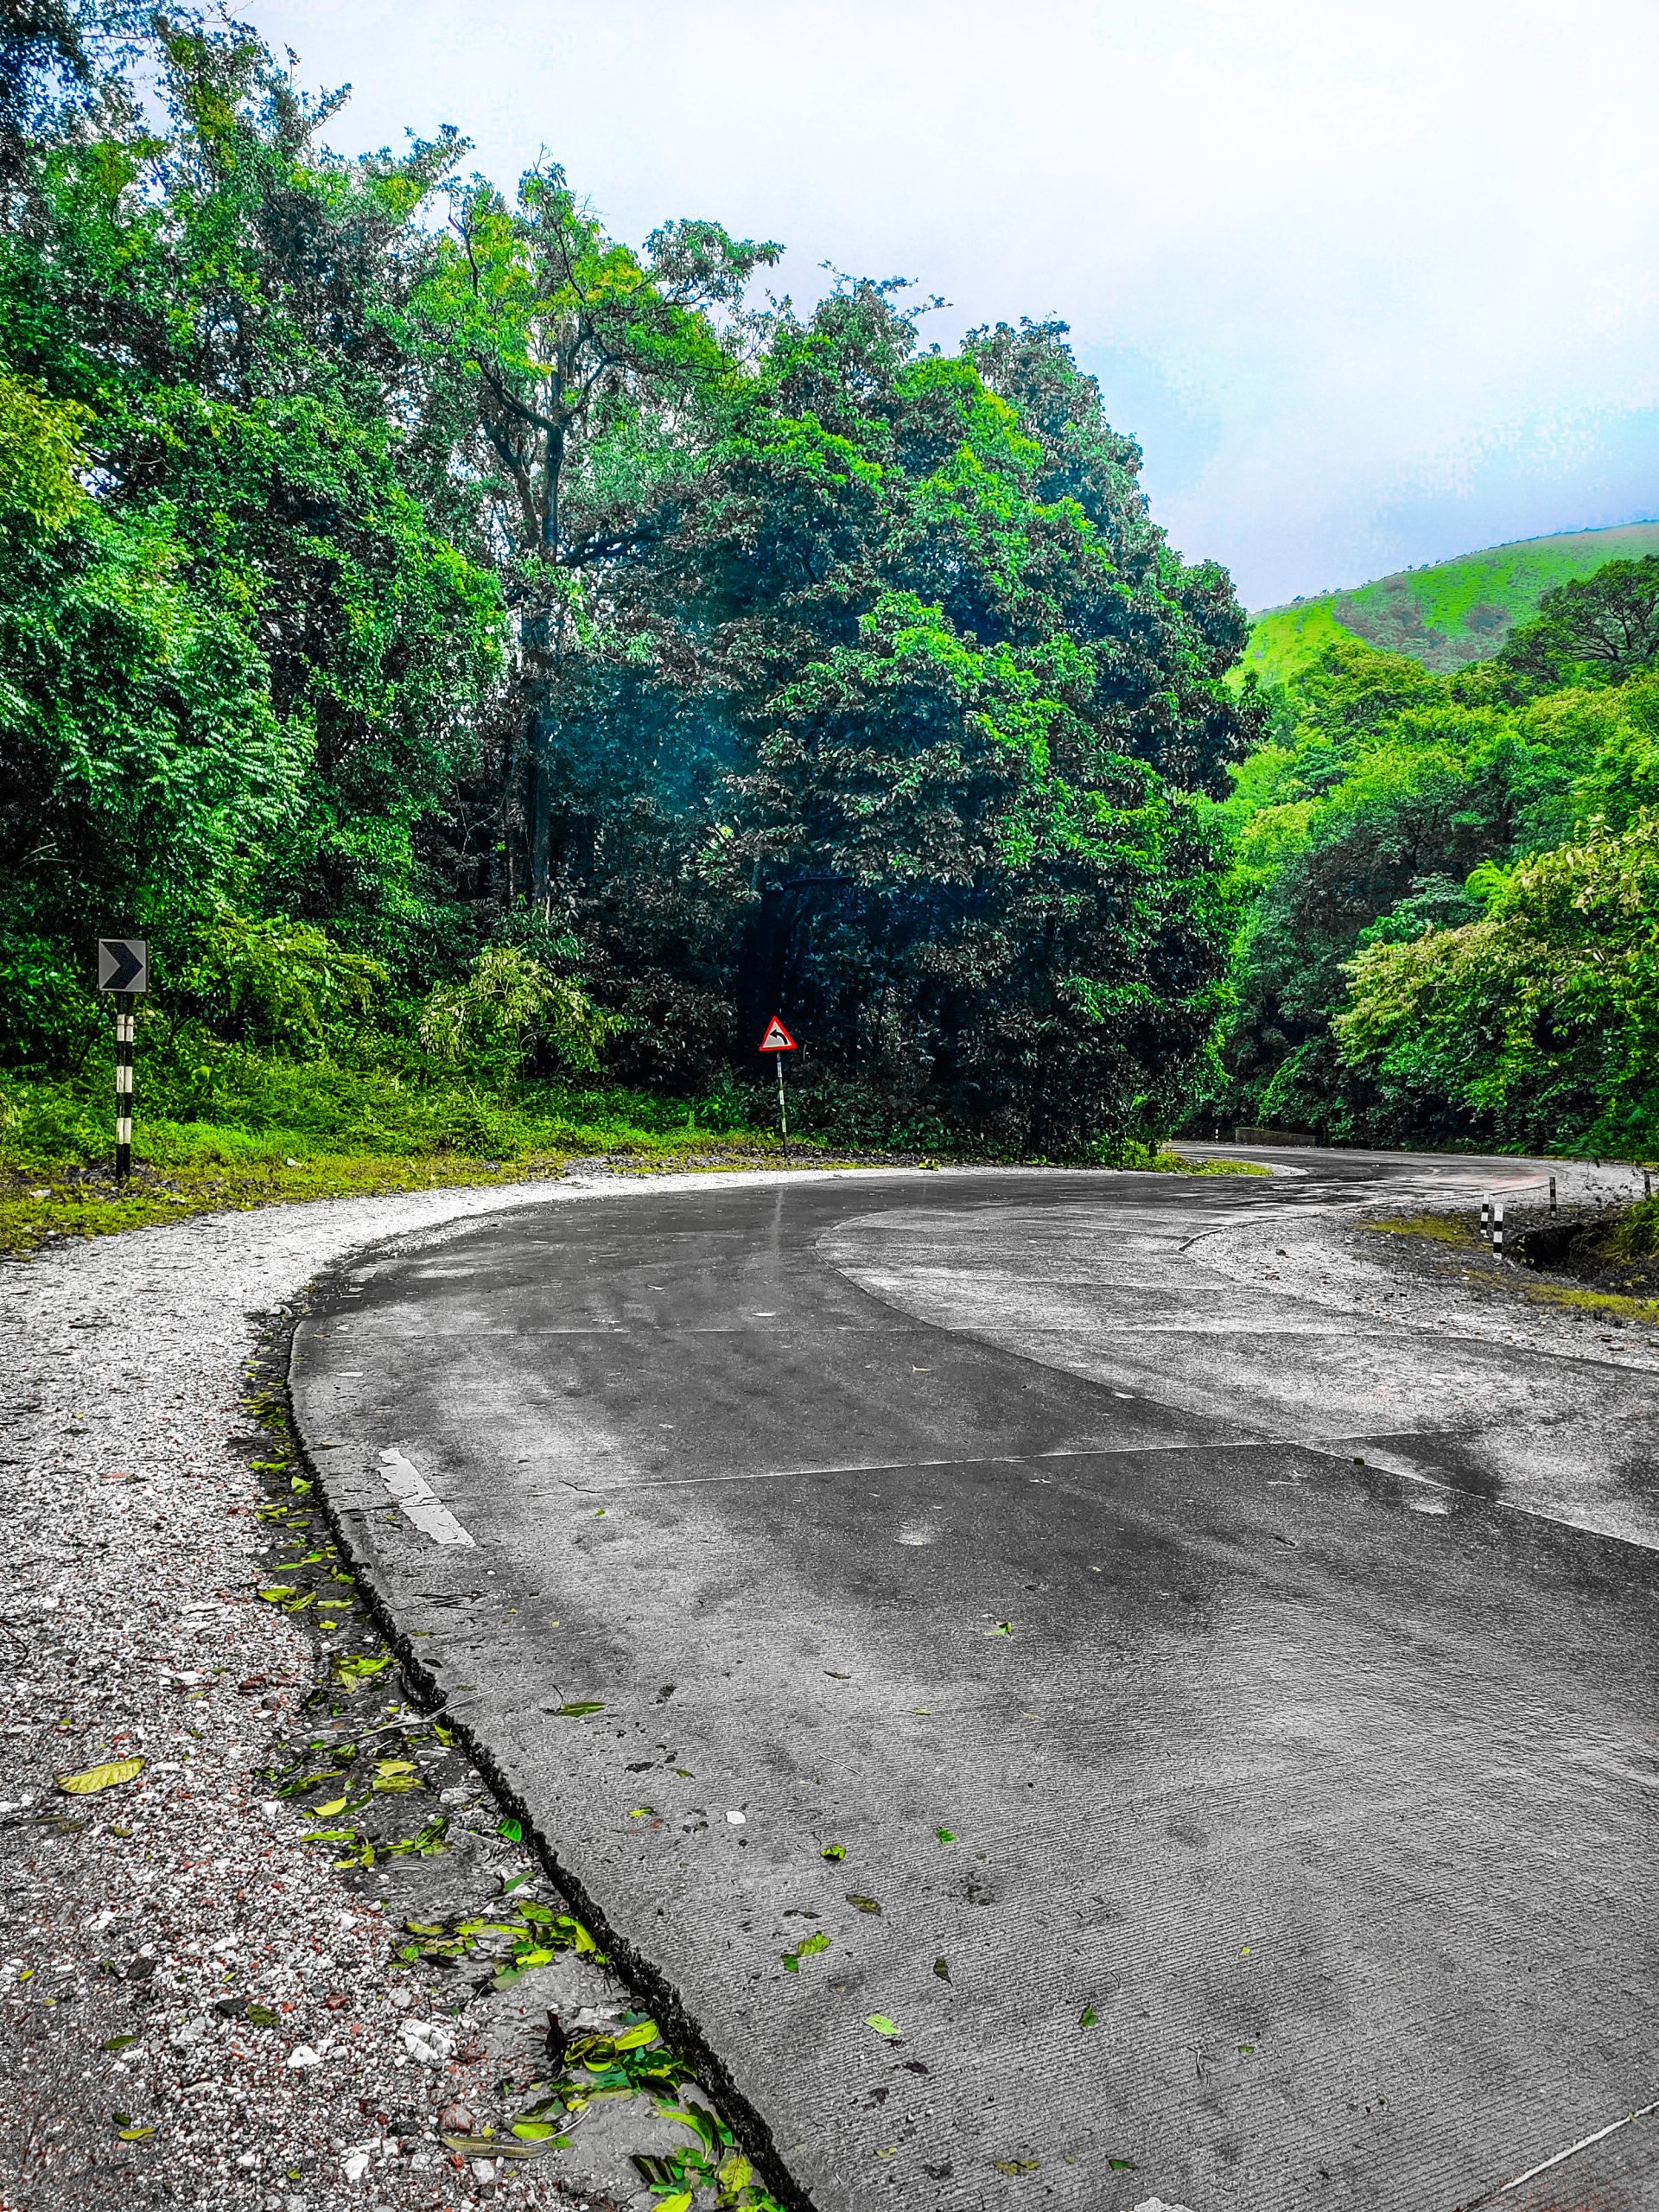 hilly roads